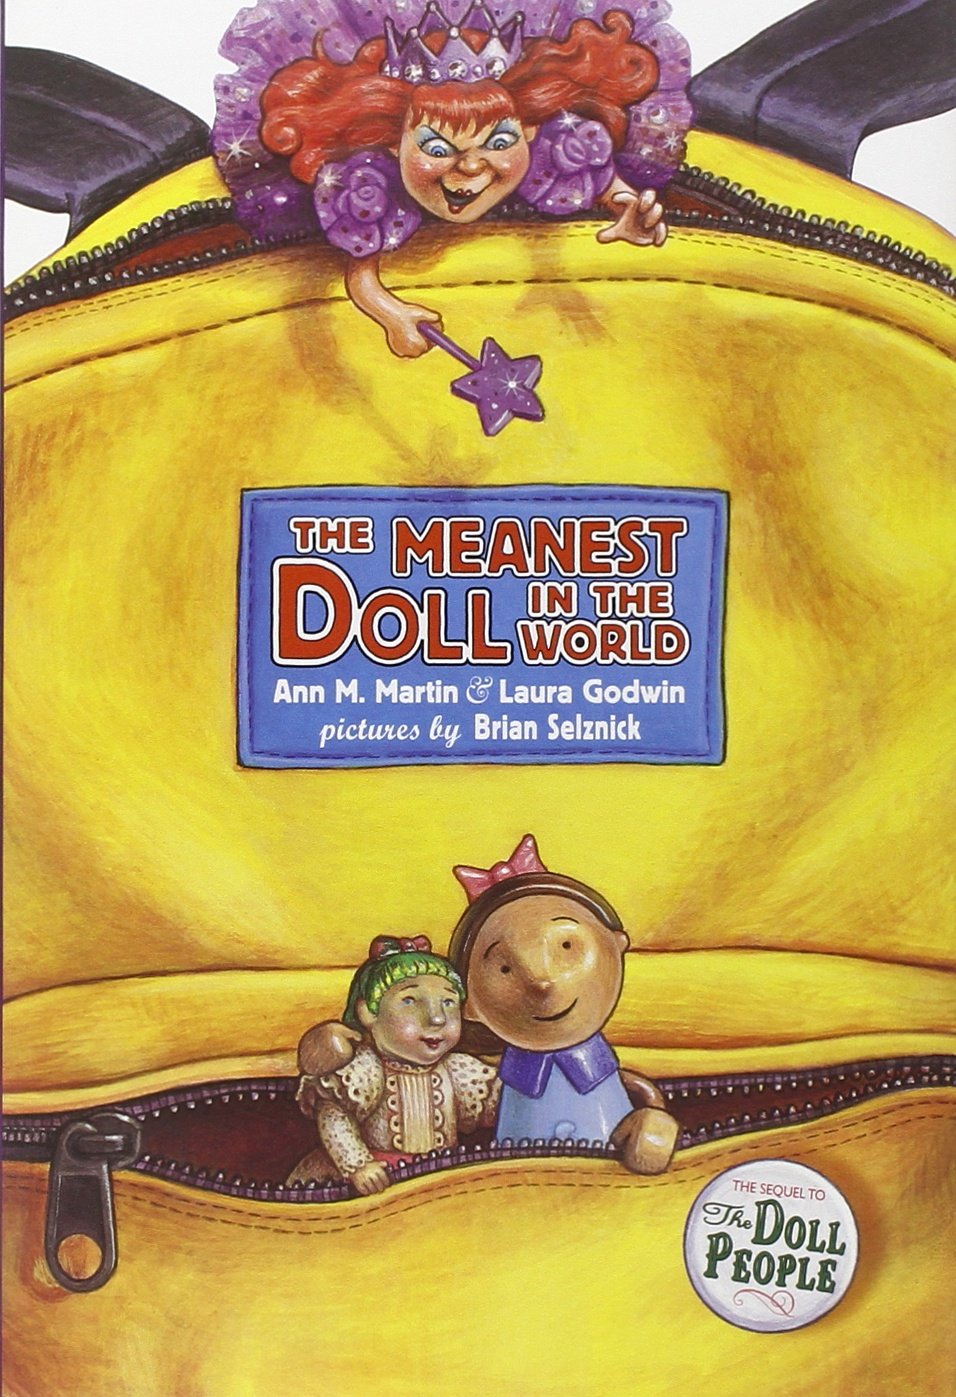 The Meanest Doll in the World (The Doll People)